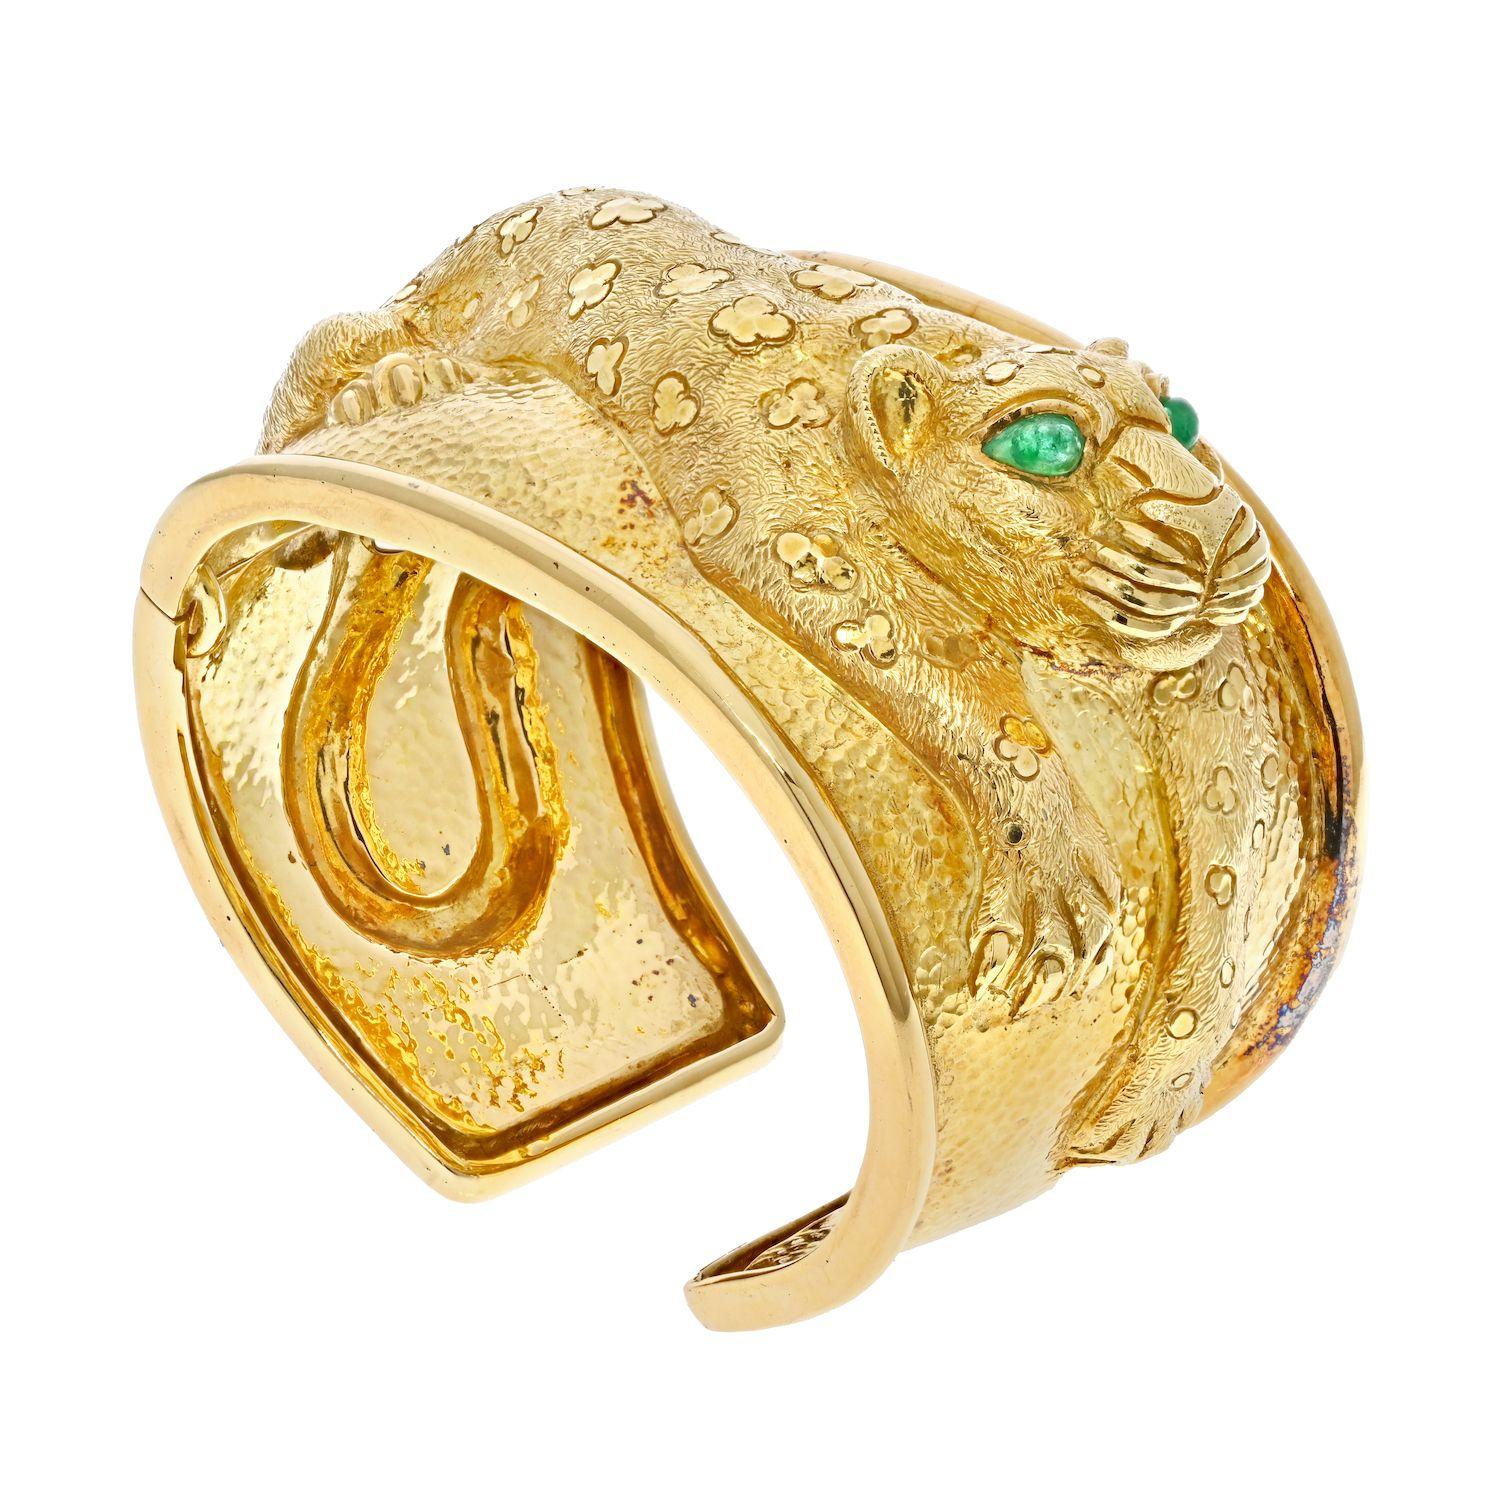 From Kingdom Collection Repoussé Leopard Hinged Cuff Bracelet. Crafted in 18k yellow gold, eyes mounted with grean cabochon pear cut emeralds. 
Hinged lock-clasp; stamped David Webb / Webb 18K. 
Measures 1.75inches wide;
Width: 6.75 in outside